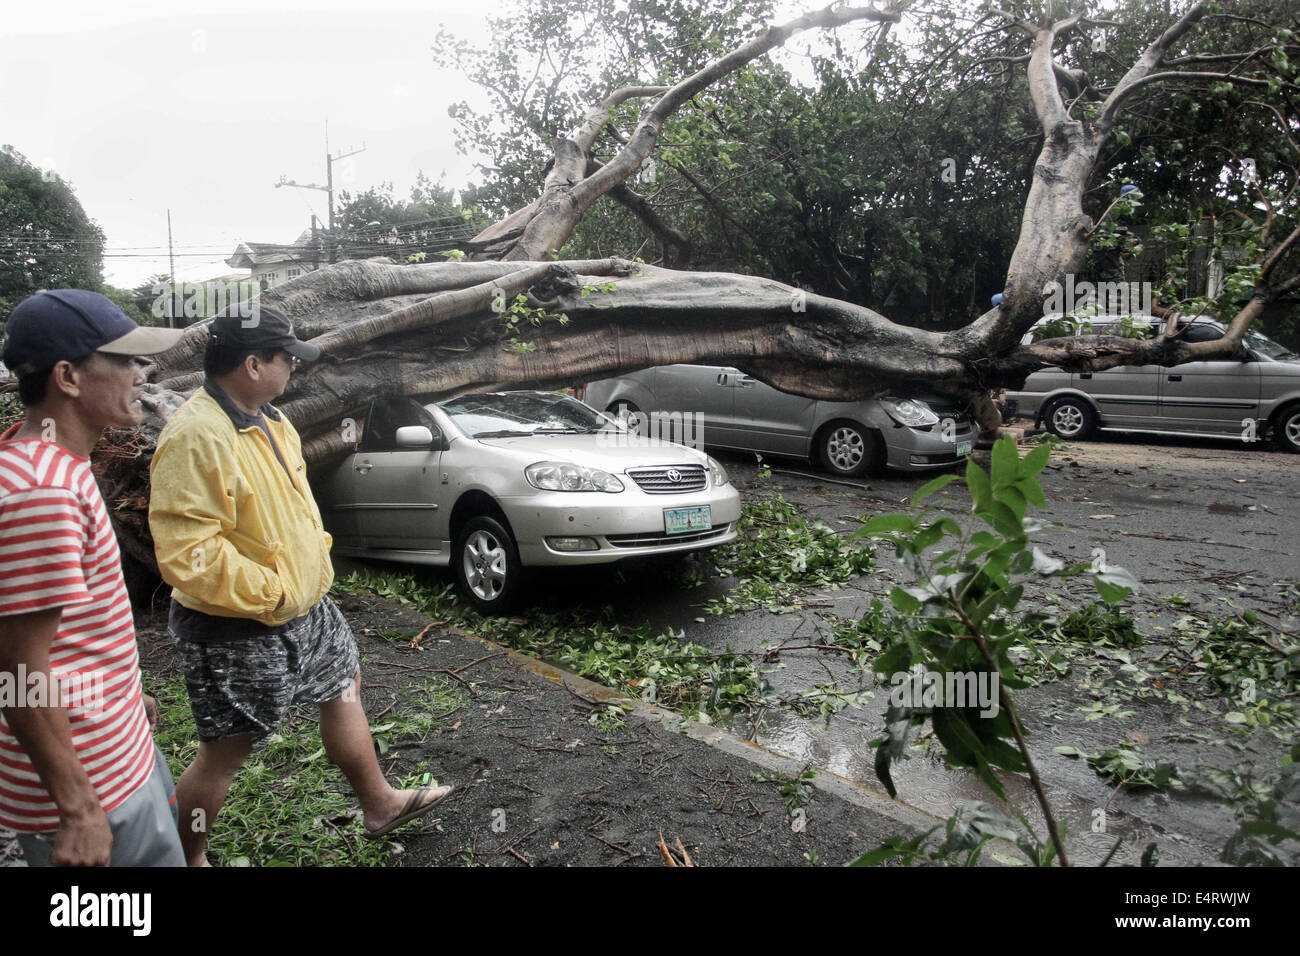 Manila, Philippines. 16th July, 2014. Men observe vehicles that were crushed by a tree near a private subdivision in Makati City as Typhoon Rammasun hit Metro Manila on July 16, 2014. Typhoon Rammasun (locally known as Glenda) had maximum sustained winds of 150 kph and gustiness of up to 185 kph when it hit Metro Manila. Across the country, about 400,000 people had fled their homes and sheltered in evacuation centers, according to the disaster management council. Credit:  ZUMA Press, Inc./Alamy Live News Stock Photo